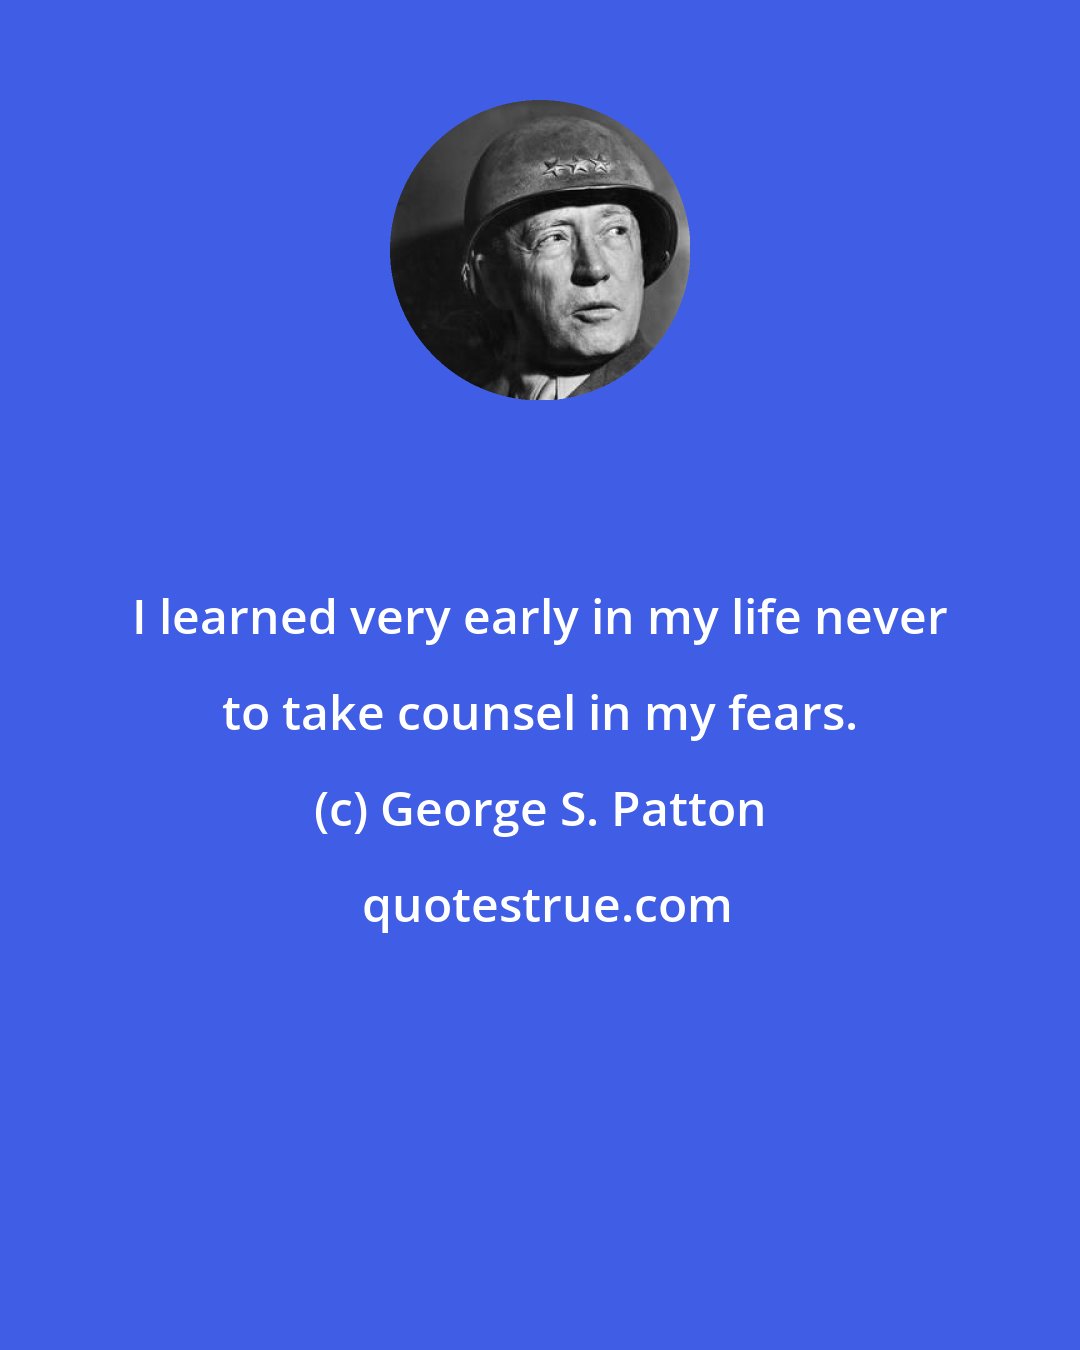 George S. Patton: I learned very early in my life never to take counsel in my fears.